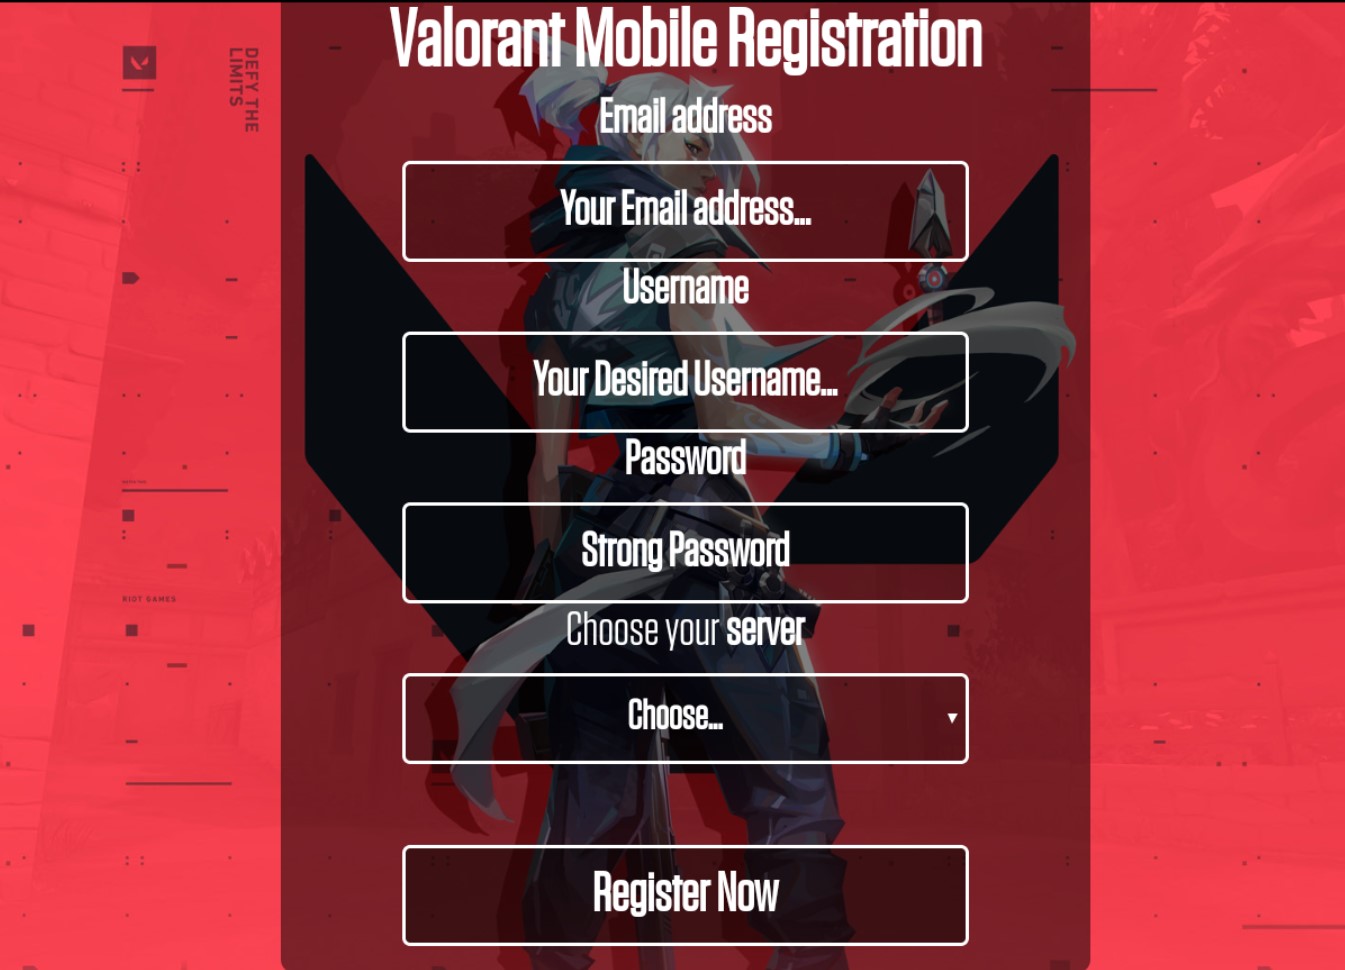 Valorant Mobile Beta Website: Is It An Official Site Or Not?